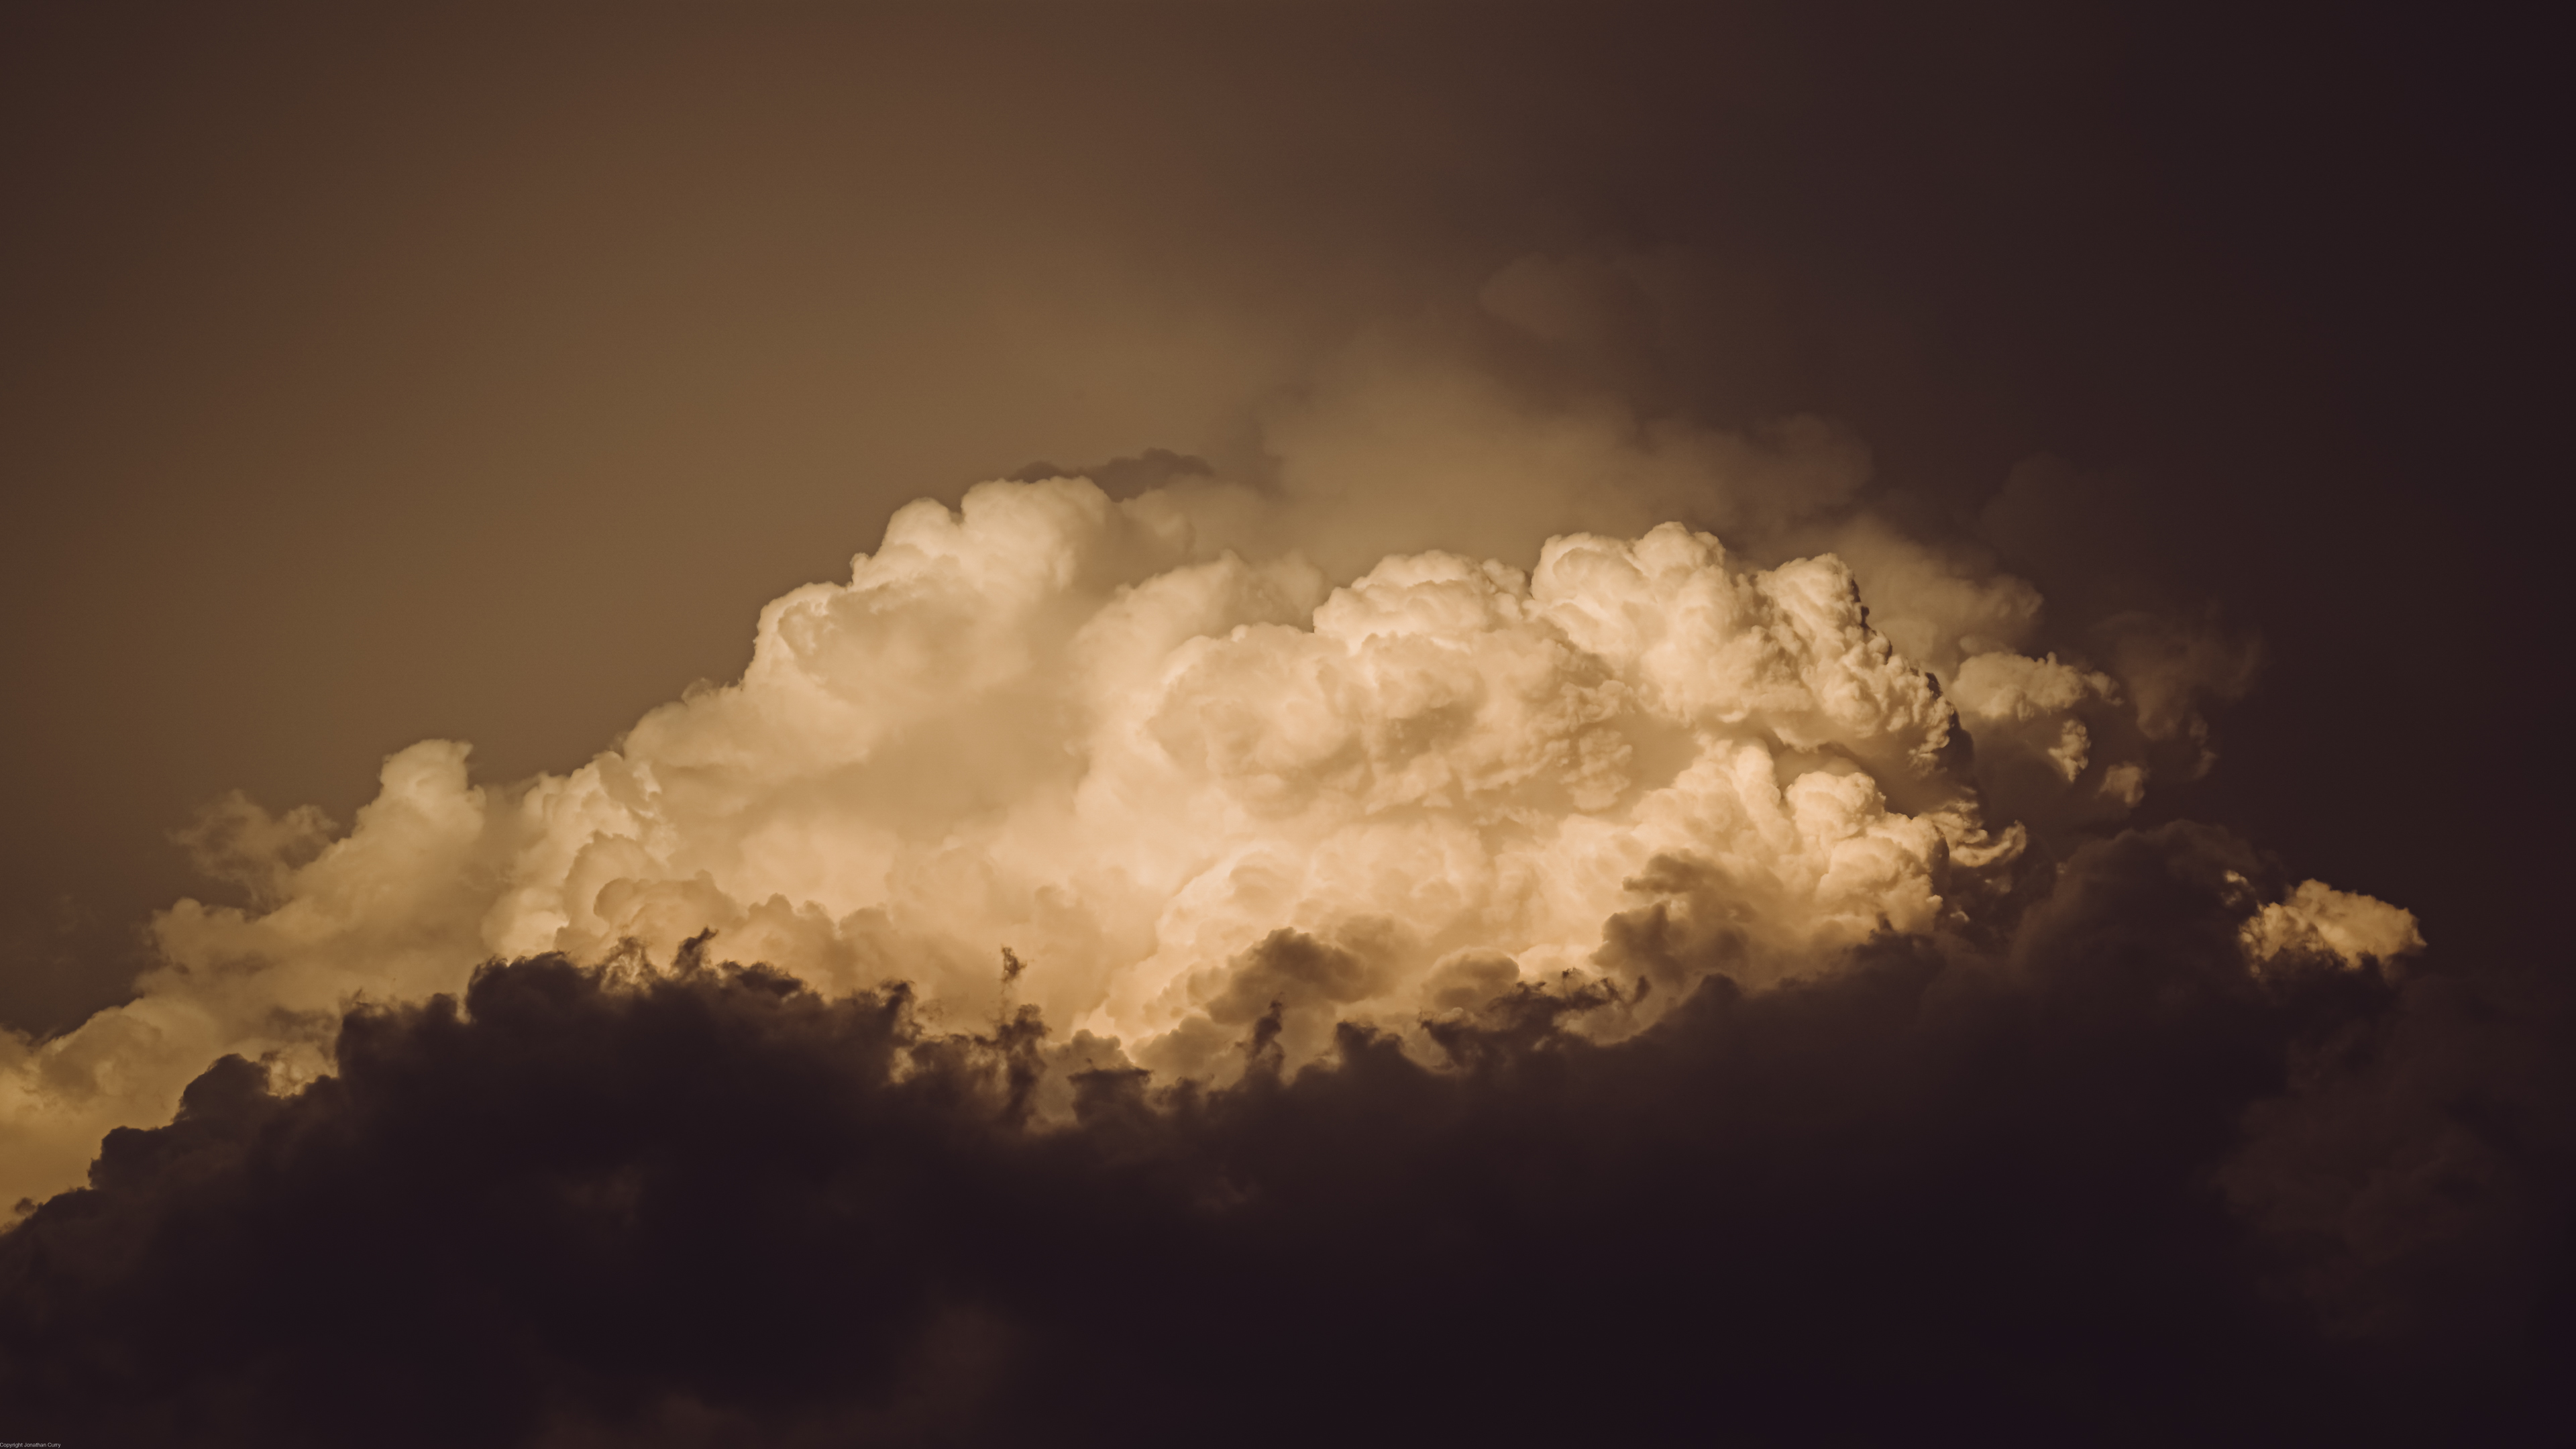 General 3840x2160 clouds landscape nature monochrome outdoors thunder storm photography 50mm minimalism sky simple background Jonathan Curry